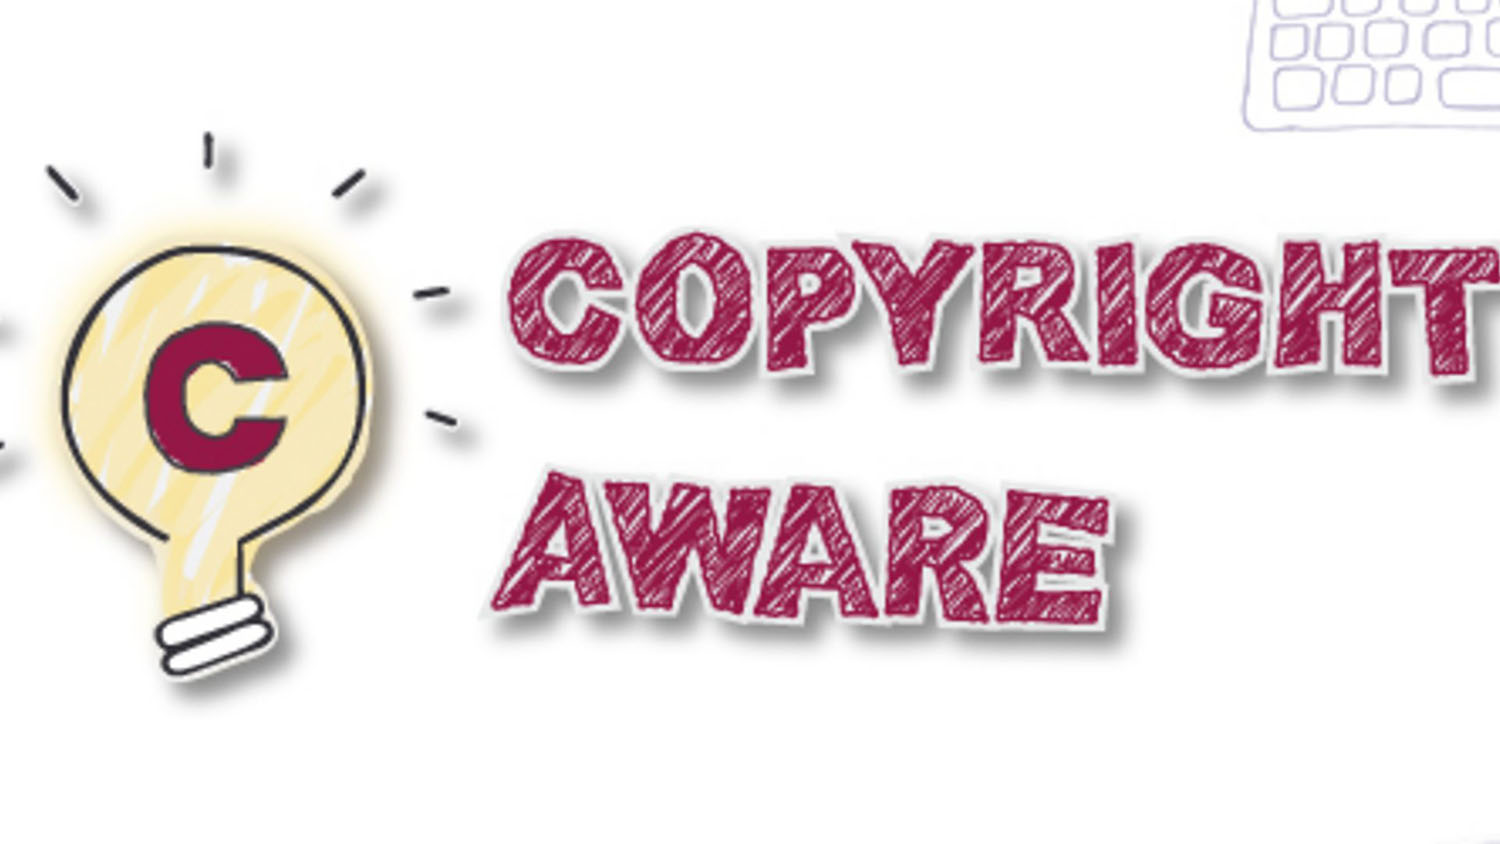 Be aware of copyright laws: